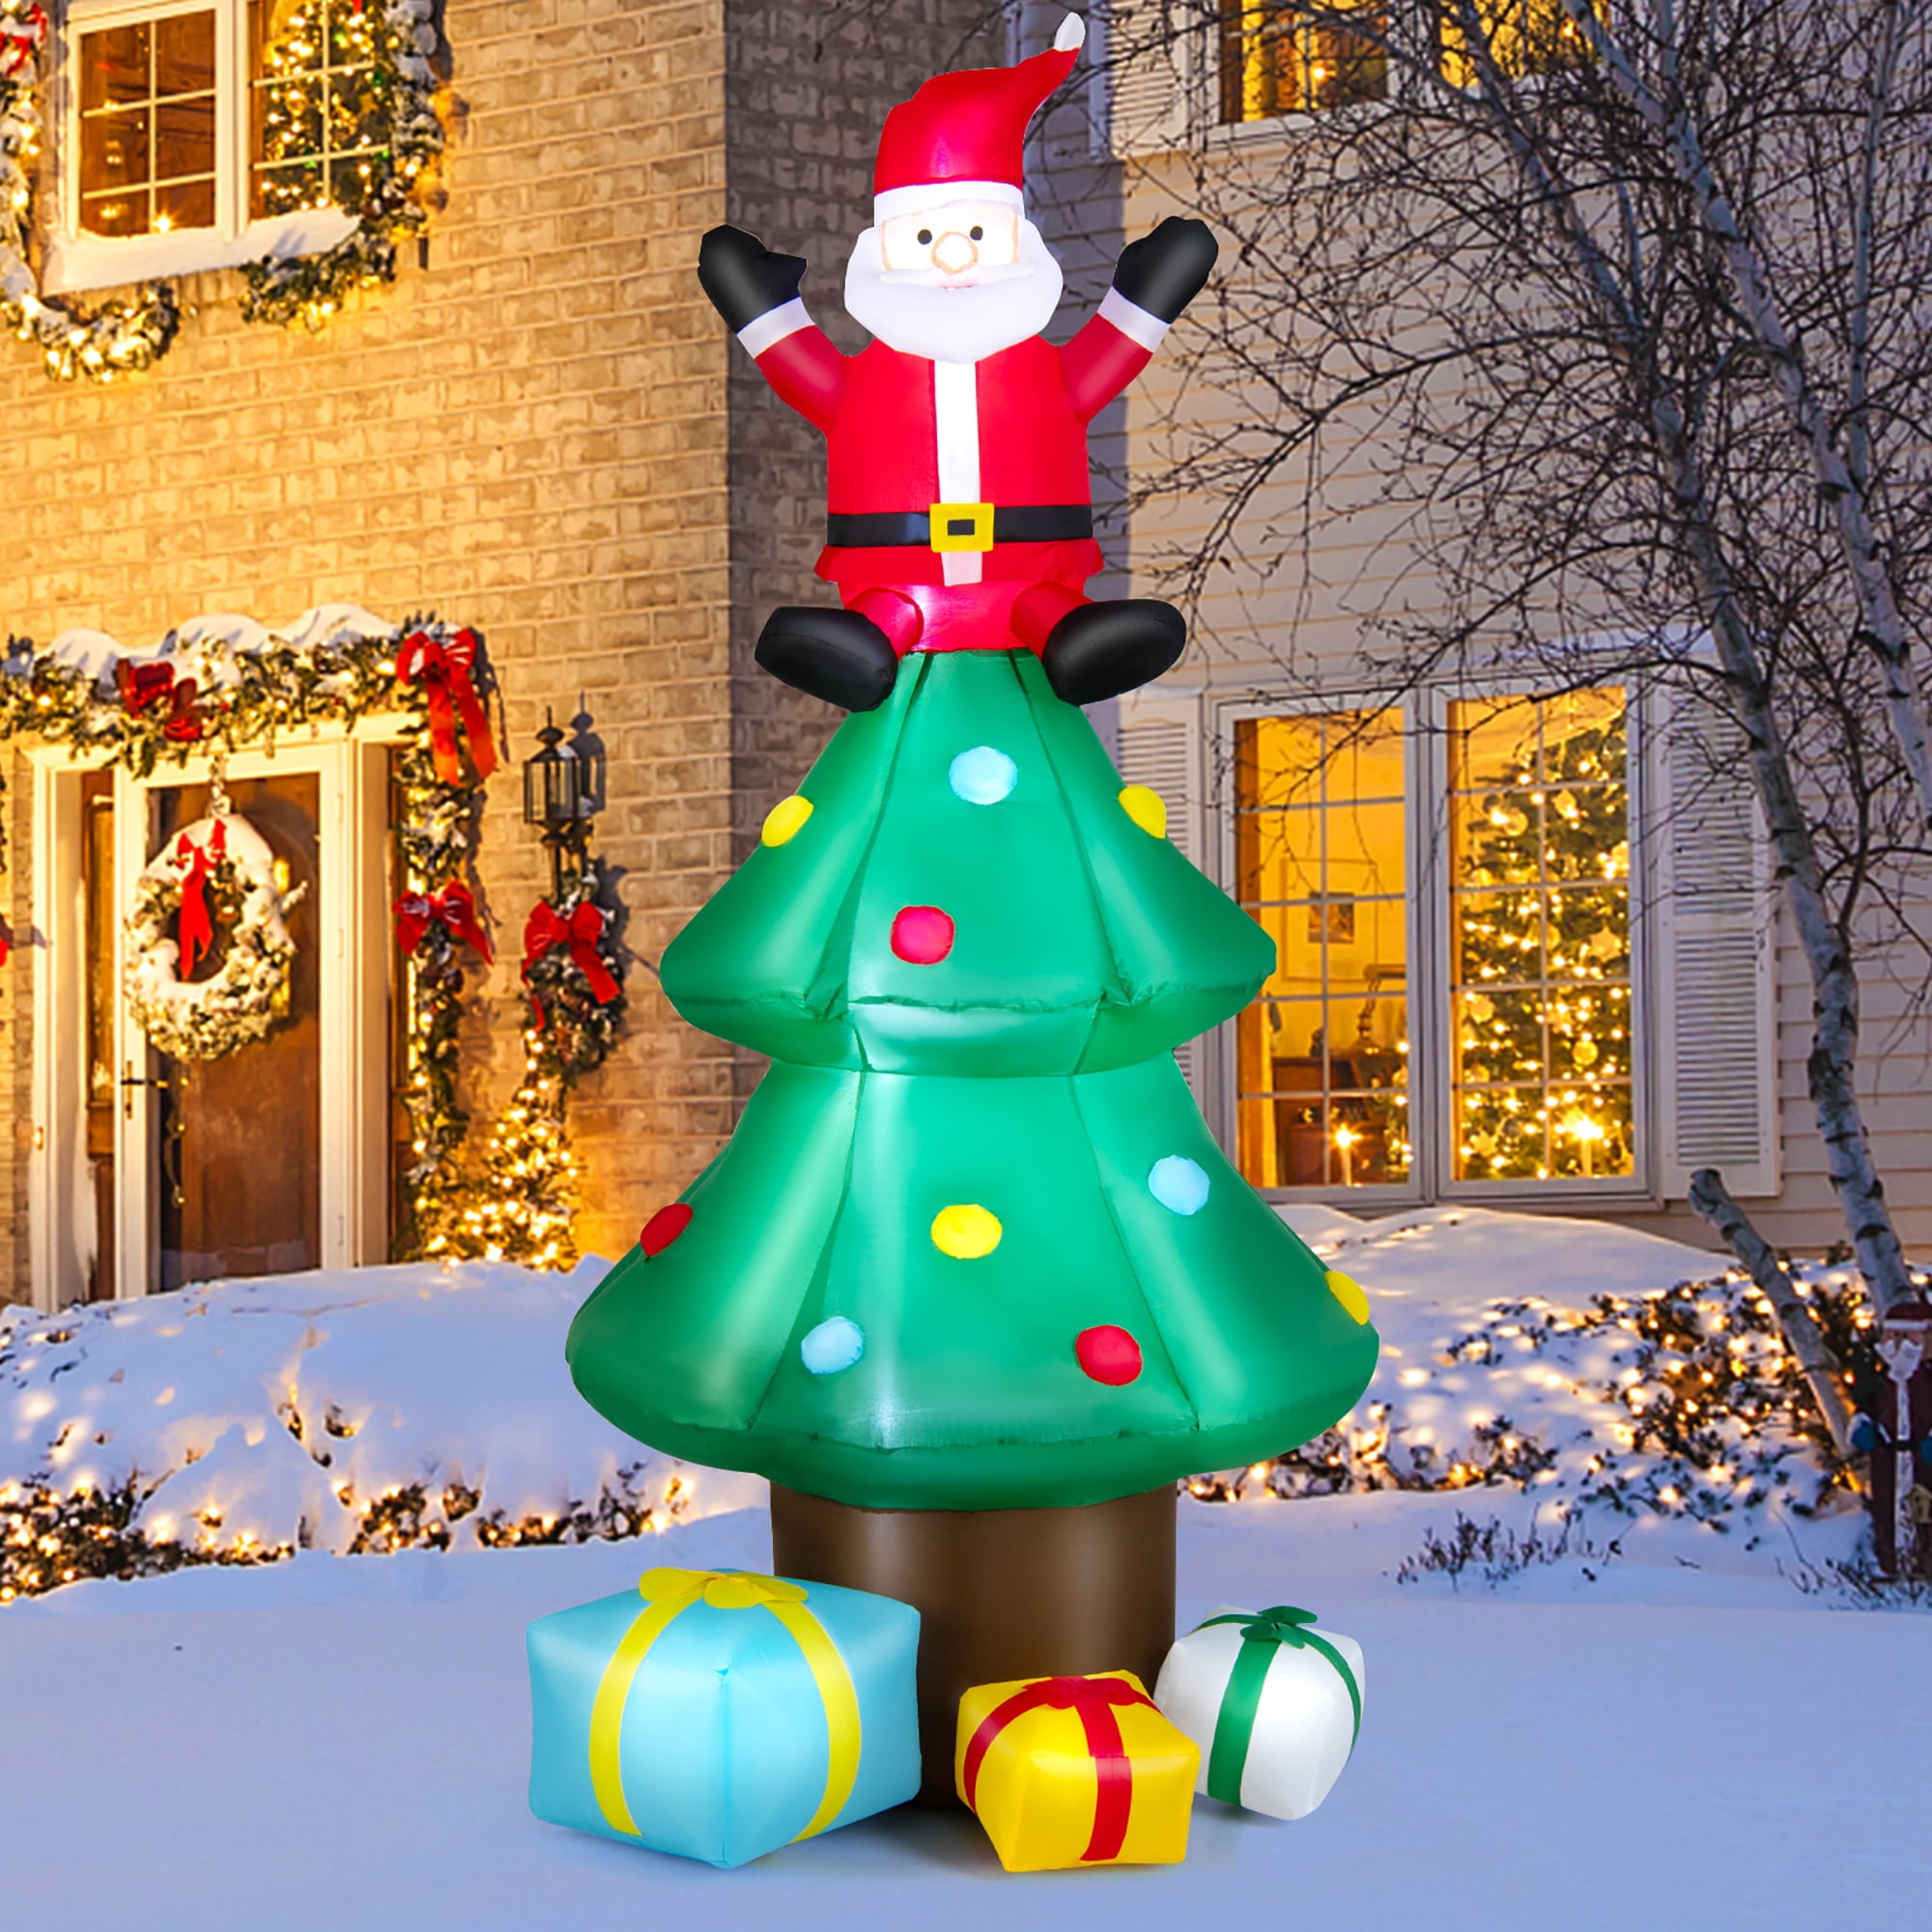 Gymax 7FT Inflatable Christmas Tree Tall Blow up Tree Holiday Decor w ...